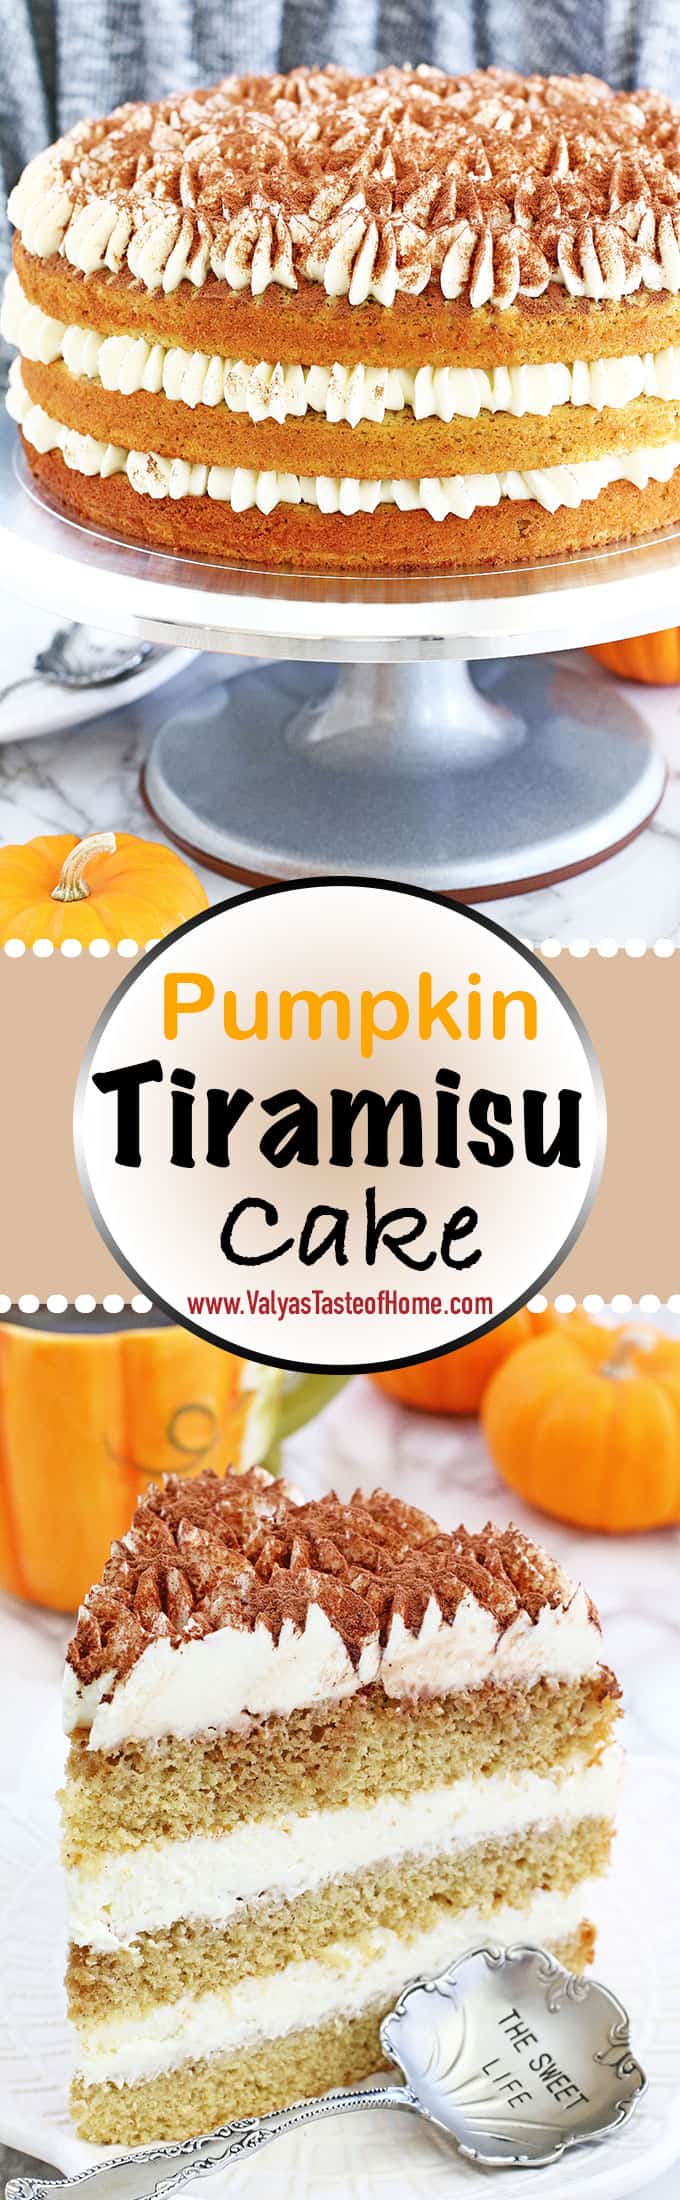 This Pumpkin Tiramisu Cake Recipe is the perfect segue into the colorful Fall season and all its delicious flavors! It is not overly sweet but is very fluffy, moist and delicious. #pumpkintiramisucake #fallbaking #easycakerecipe #valyastasteofhome